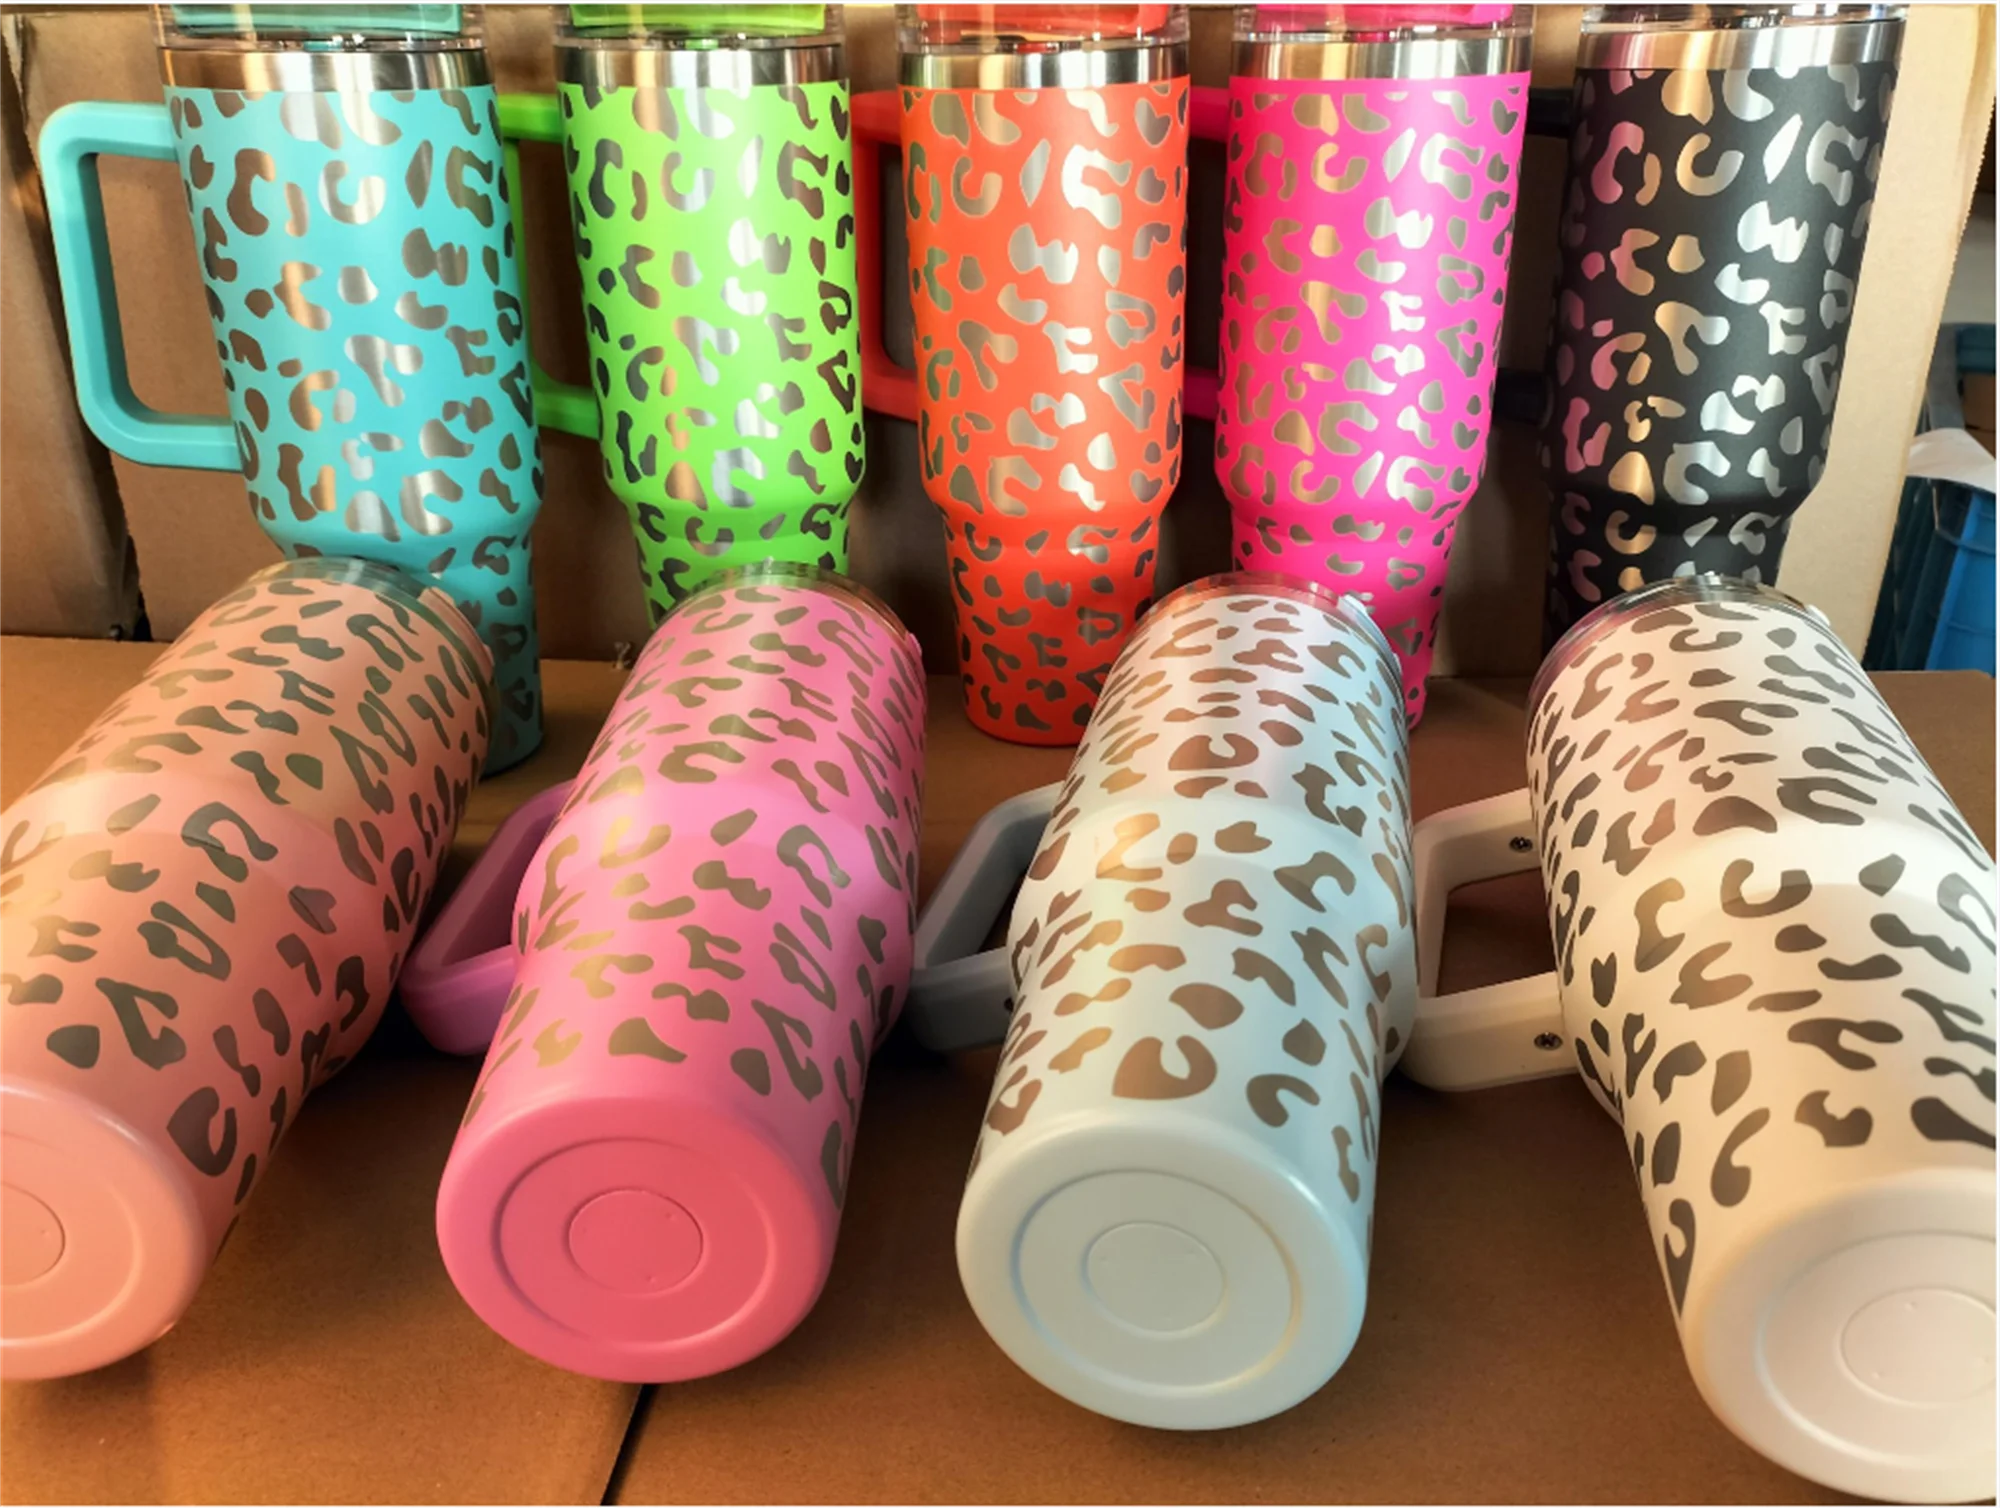 https://ae01.alicdn.com/kf/S4f1fa90262164833b05c9de92b09a1f8N/Leopard-stainless-steel-tumbler-with-lid-straw-cheetah-handdle-tumbler-Laser-Engraved-mug-Water-cup-beer.png